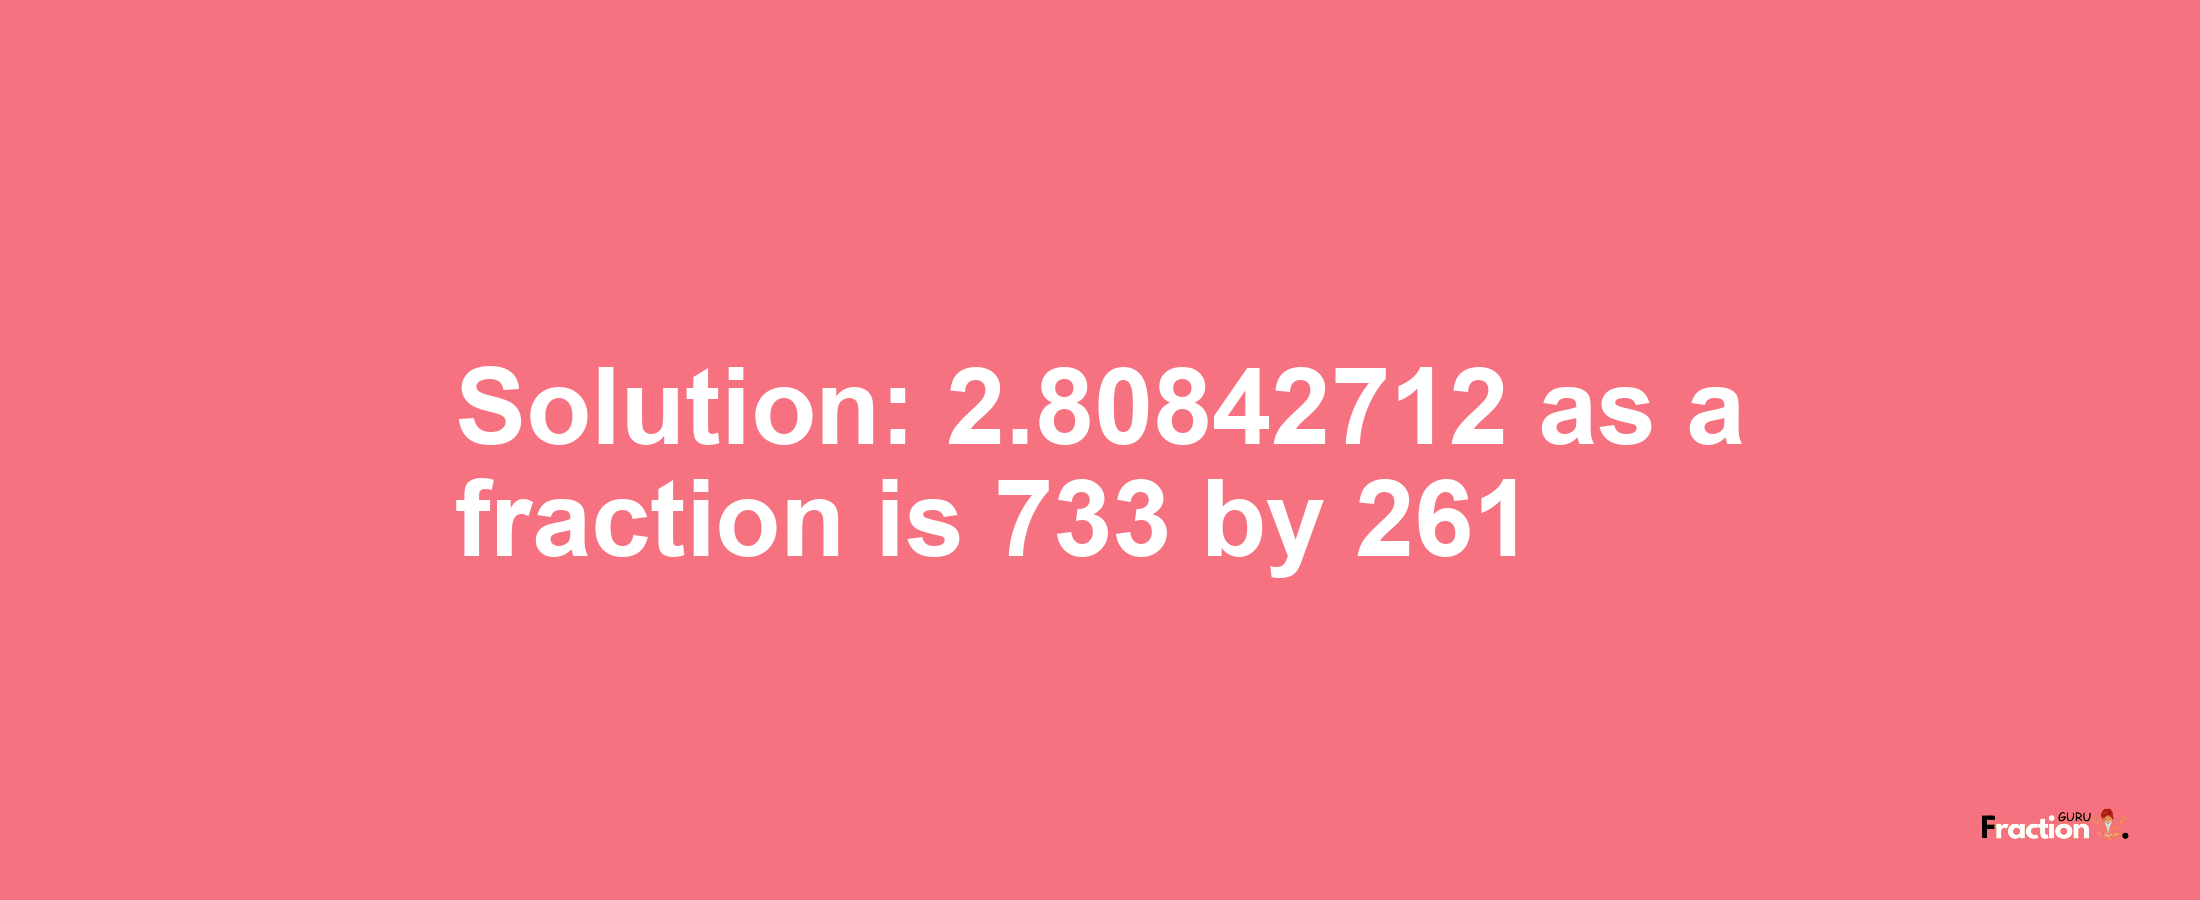 Solution:2.80842712 as a fraction is 733/261